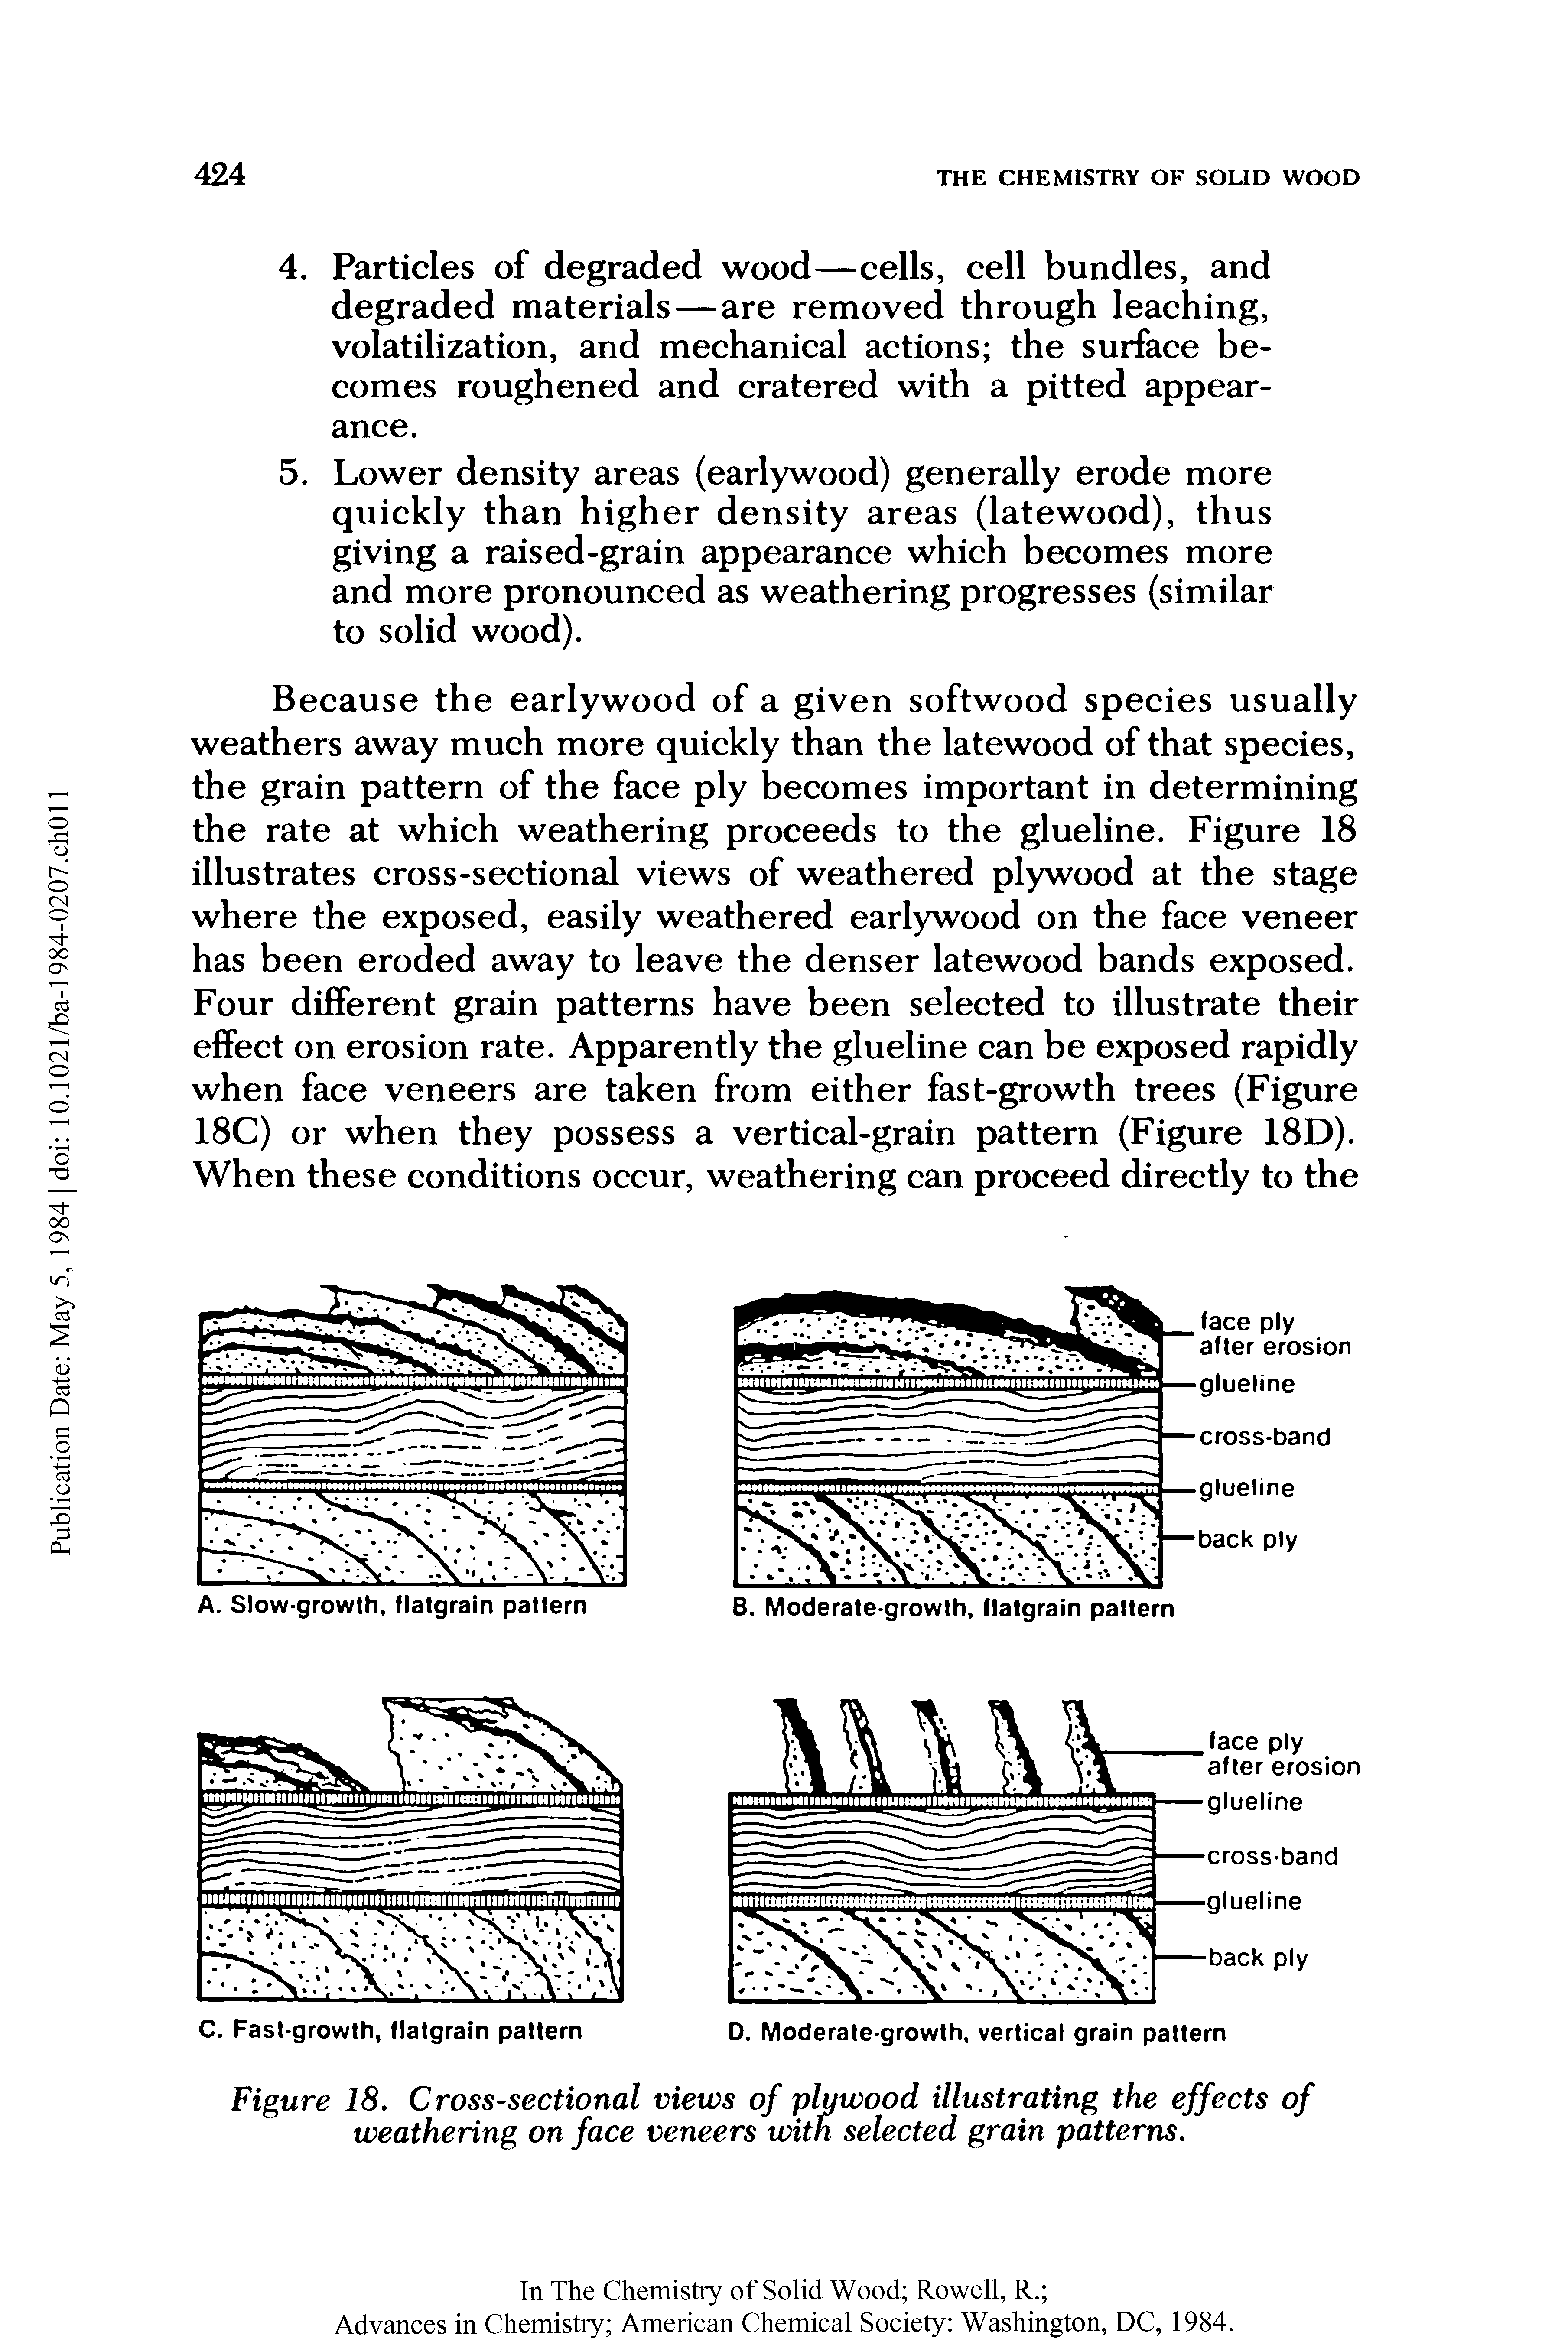 Figure 18. Cross-sectional views of plywood illustrating the effects of weathering on face veneers with selected grain patterns.